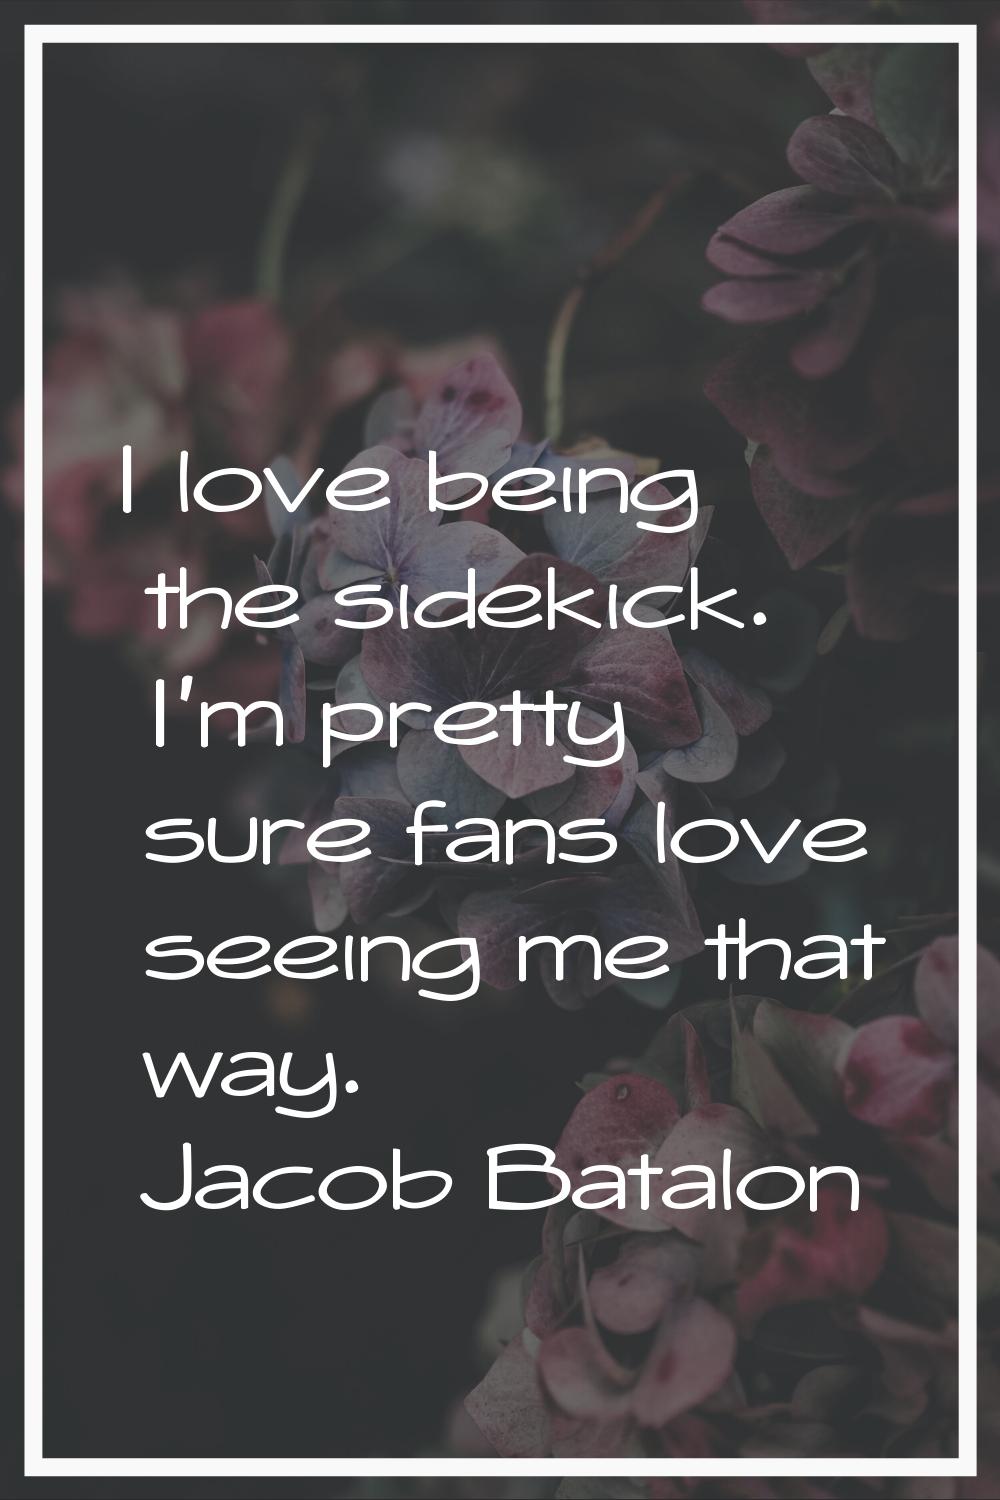 I love being the sidekick. I'm pretty sure fans love seeing me that way.